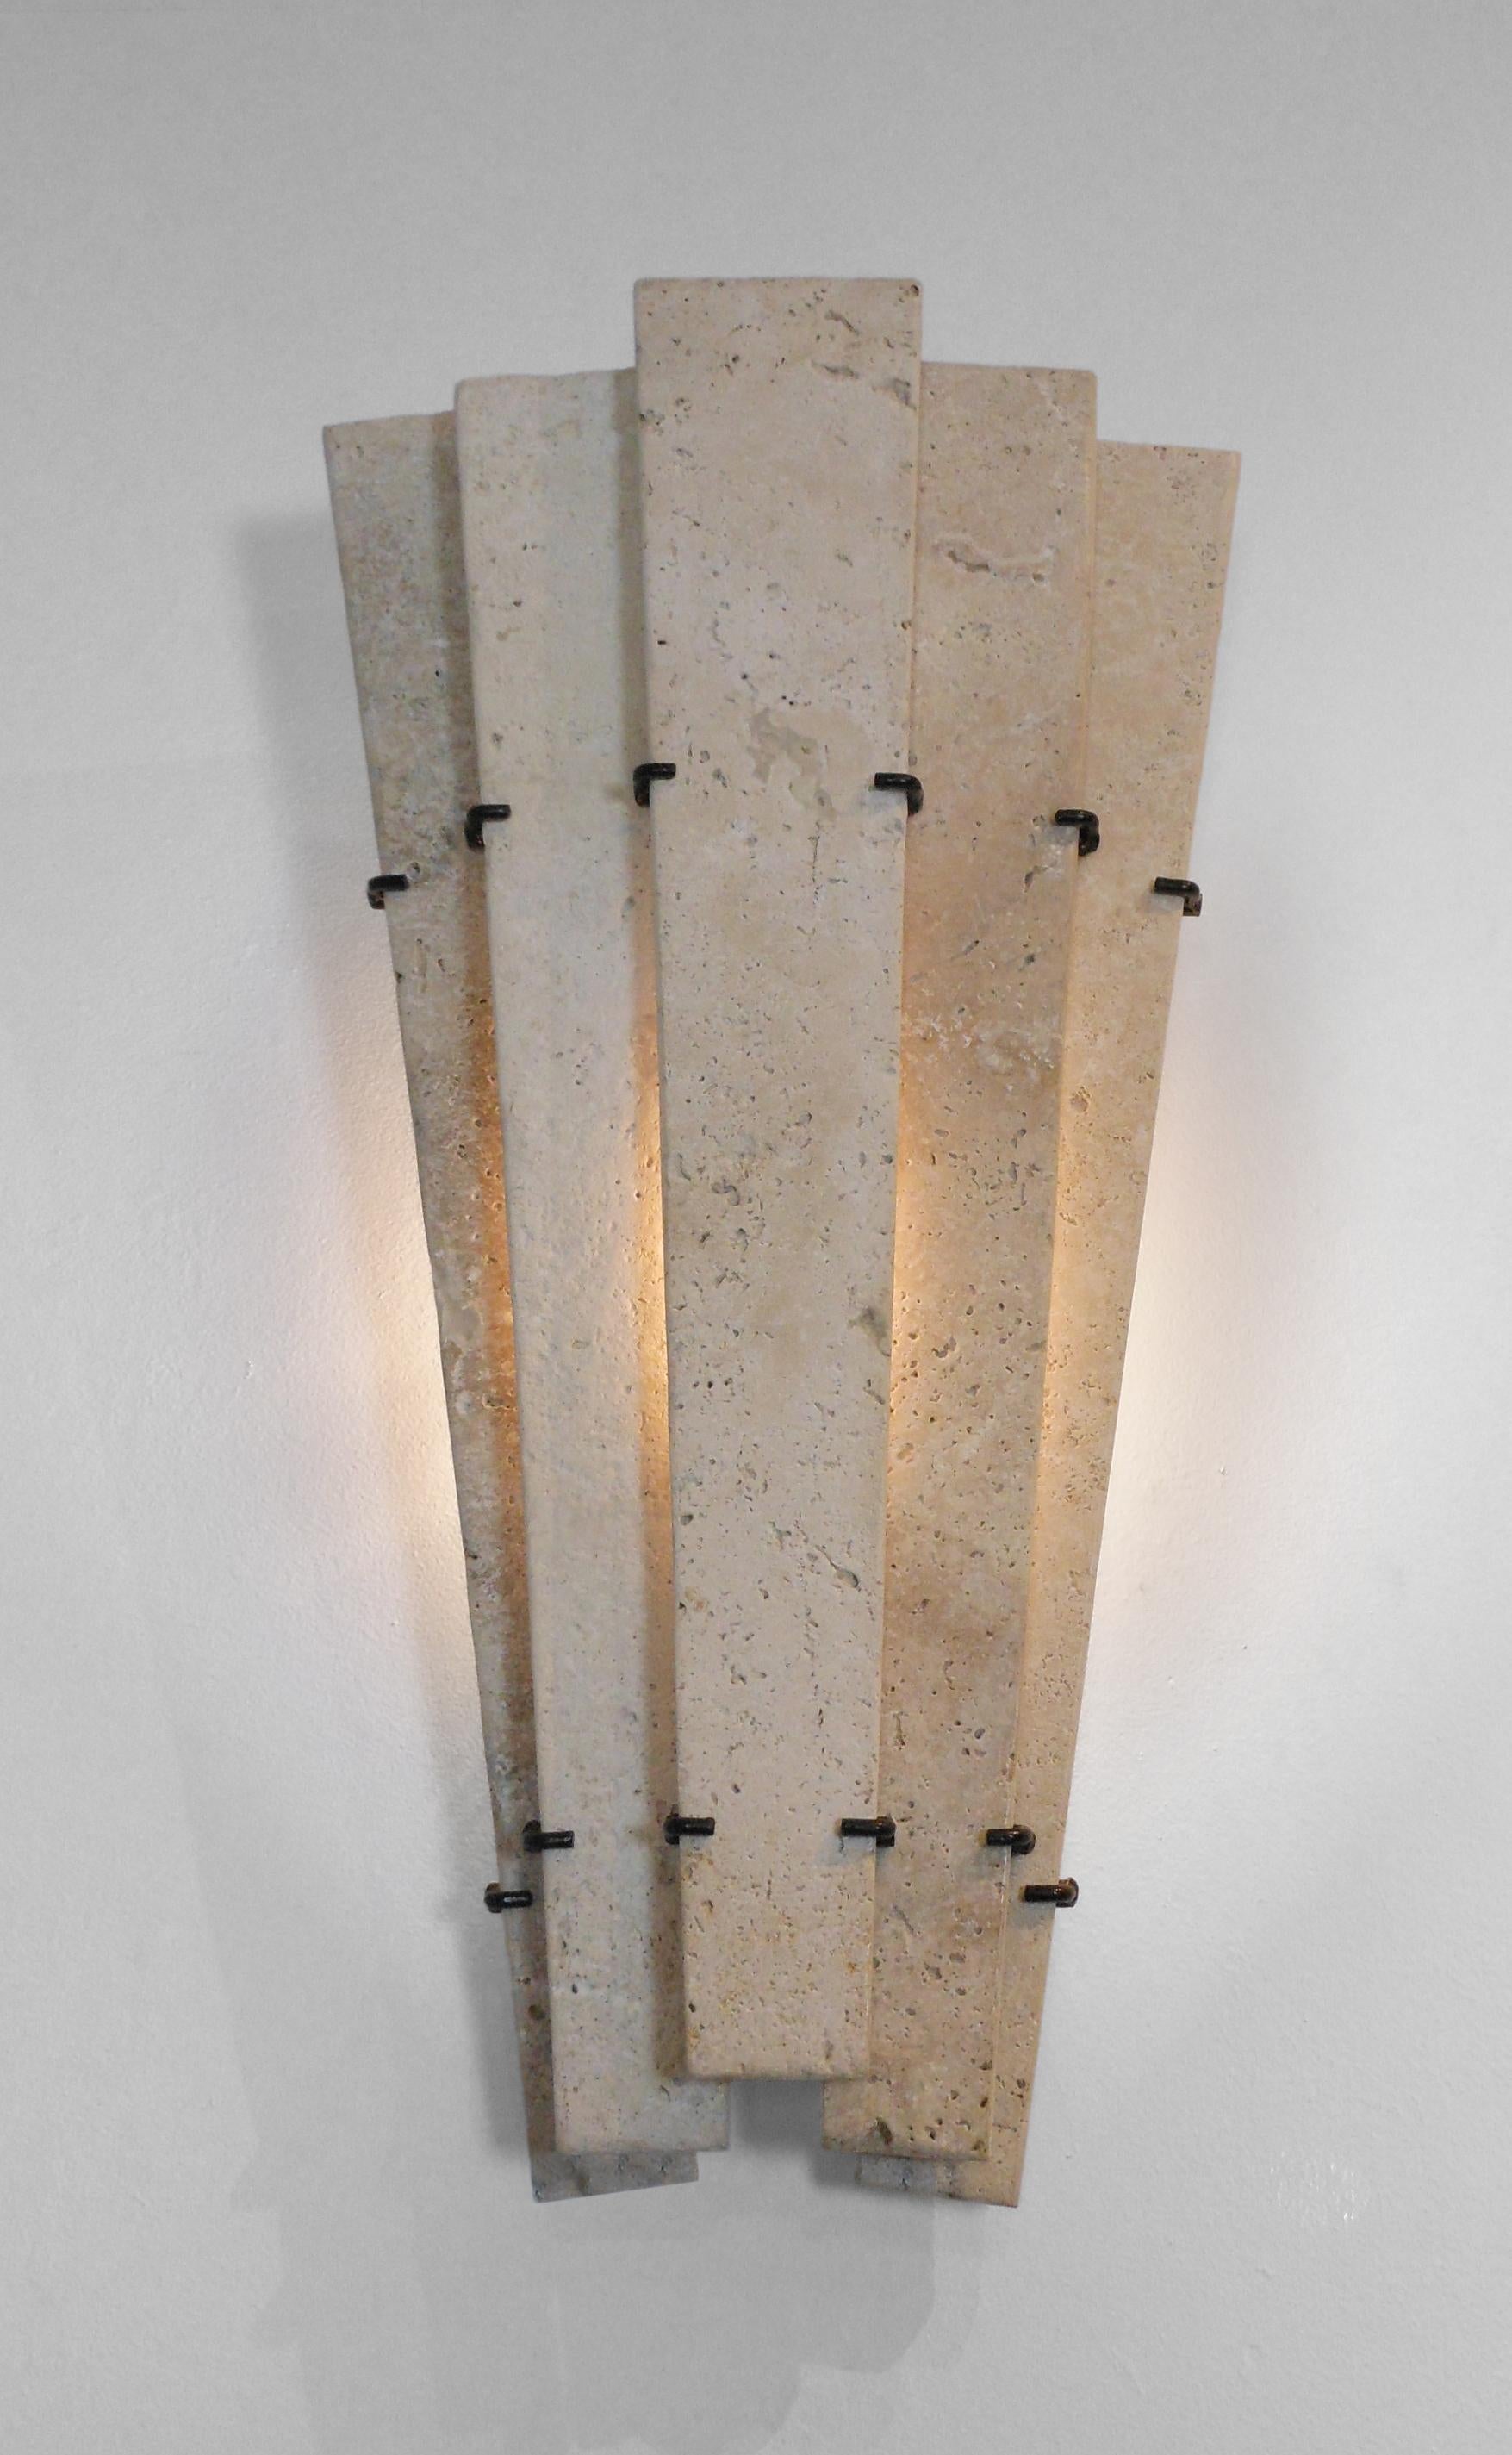 Pair French Travertine Marble Sconces
Mid Century Modern
Classic travertine innovatively used in linear strips held by metal clasps. Each composed of five tapering vertical panels arranged in a step pattern.